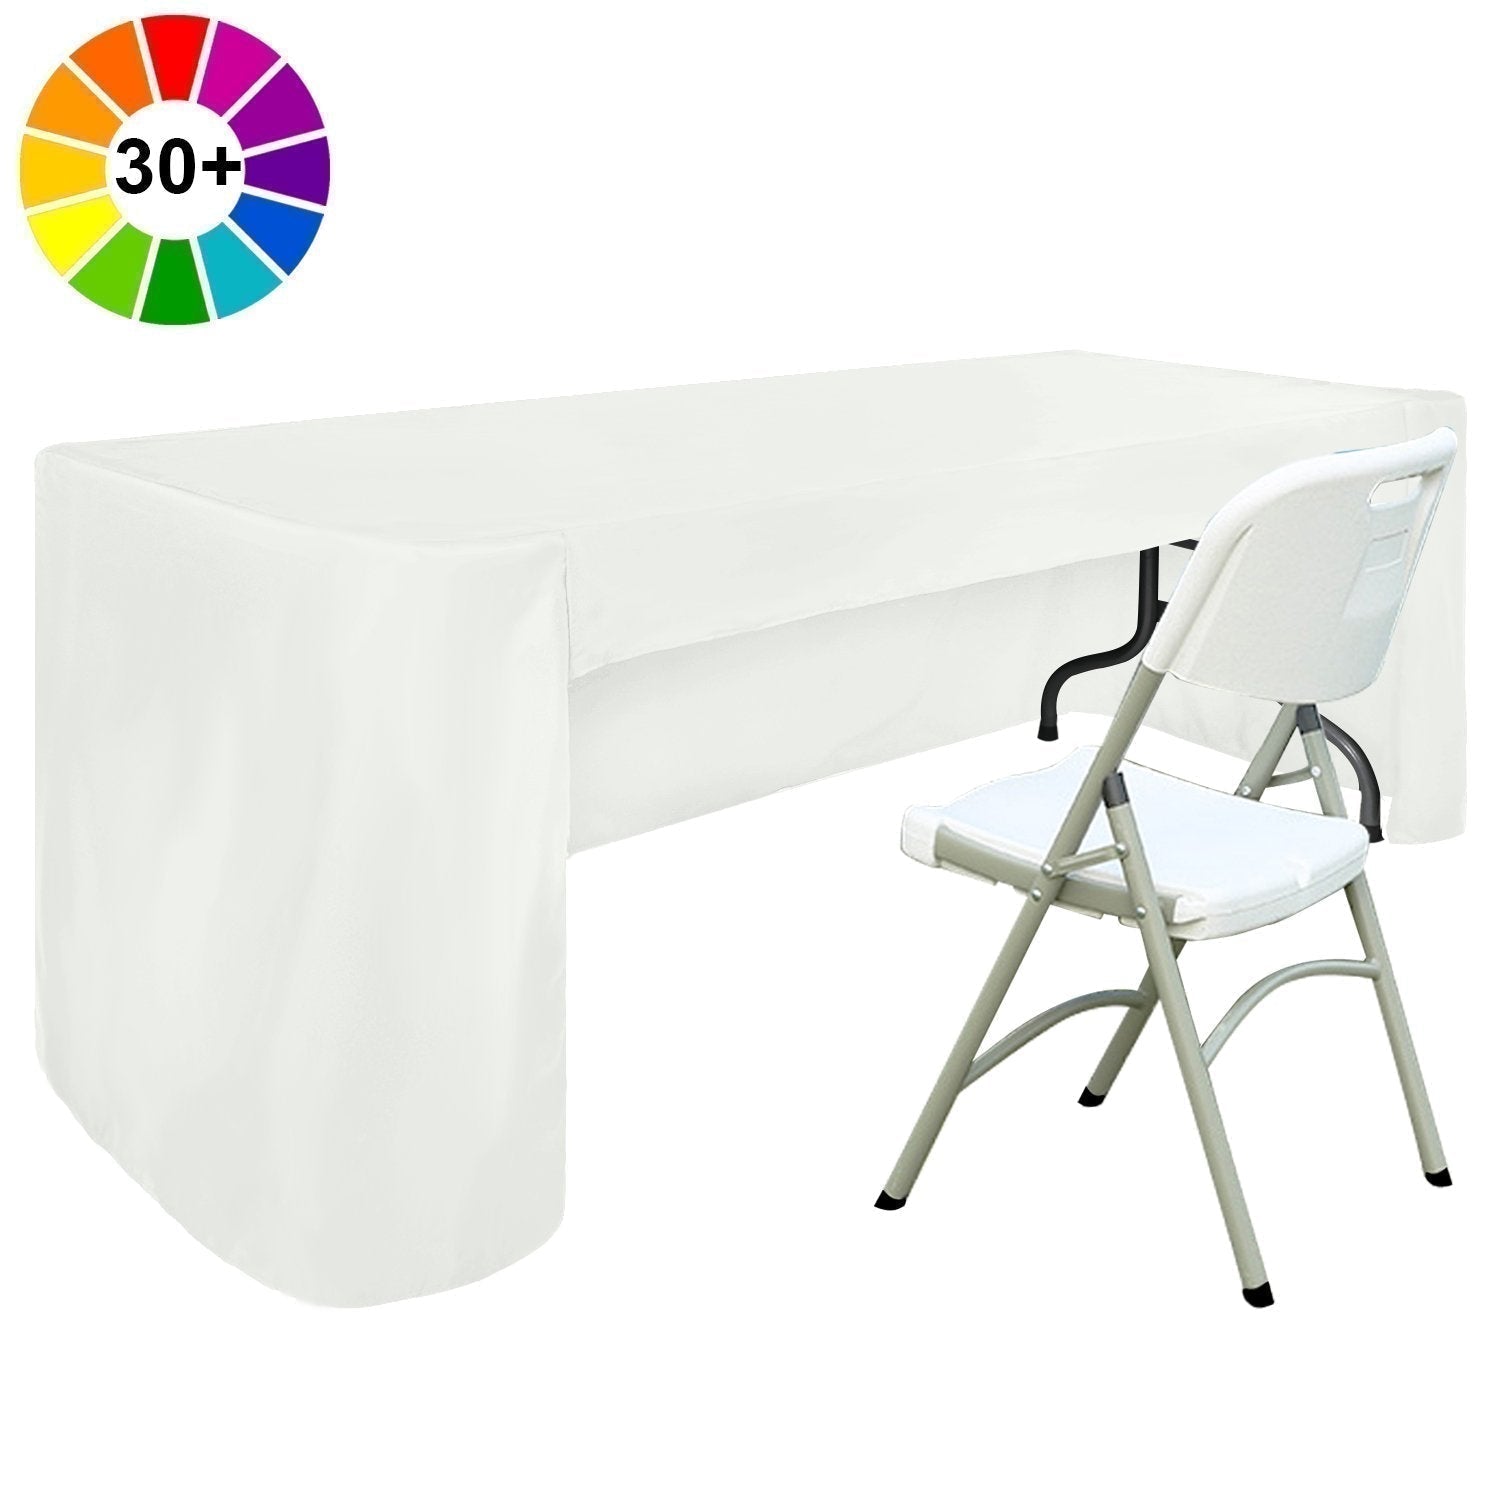 6 FT Rectangle Dinner Tablecloth Table Cover for Rectangular Table - ABC-CANOPY